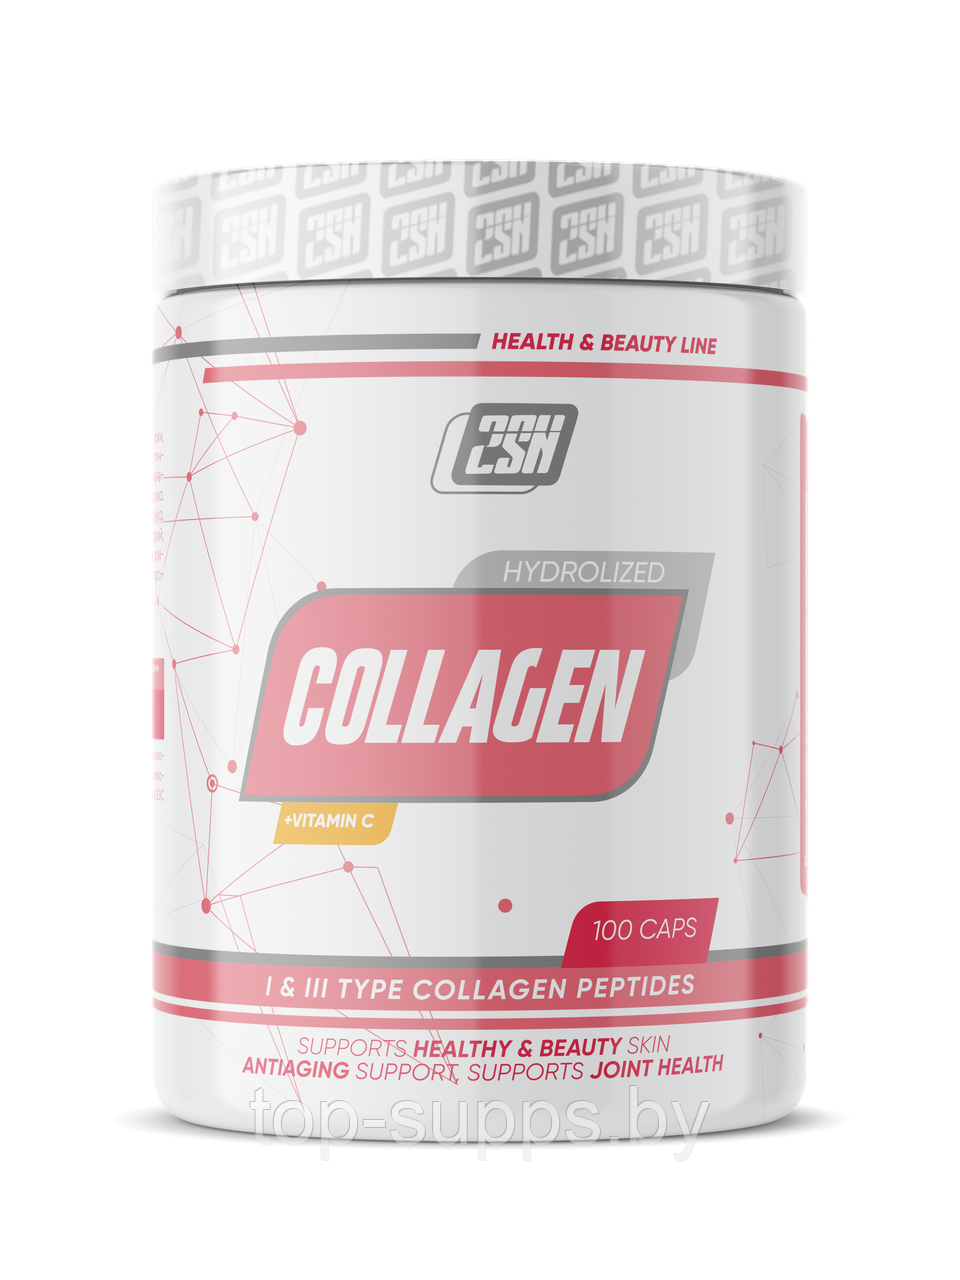 2SN Collagen + Vitamin C from 2SN (100 caps) - фото 1 - id-p208806375